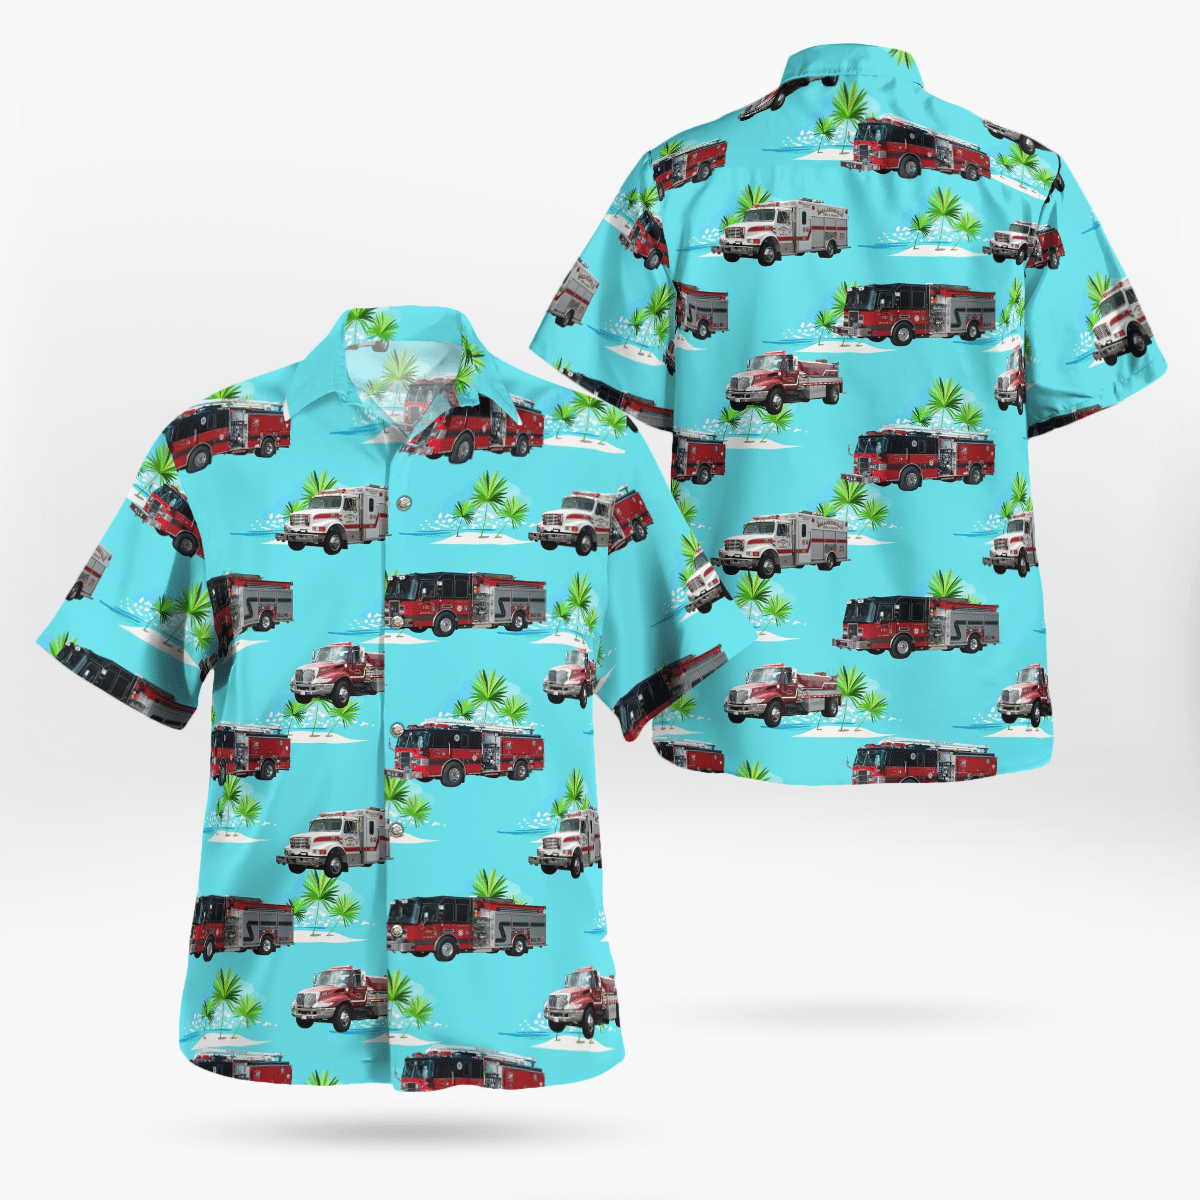 Some cool 3d hawaii shirt for this summer 99